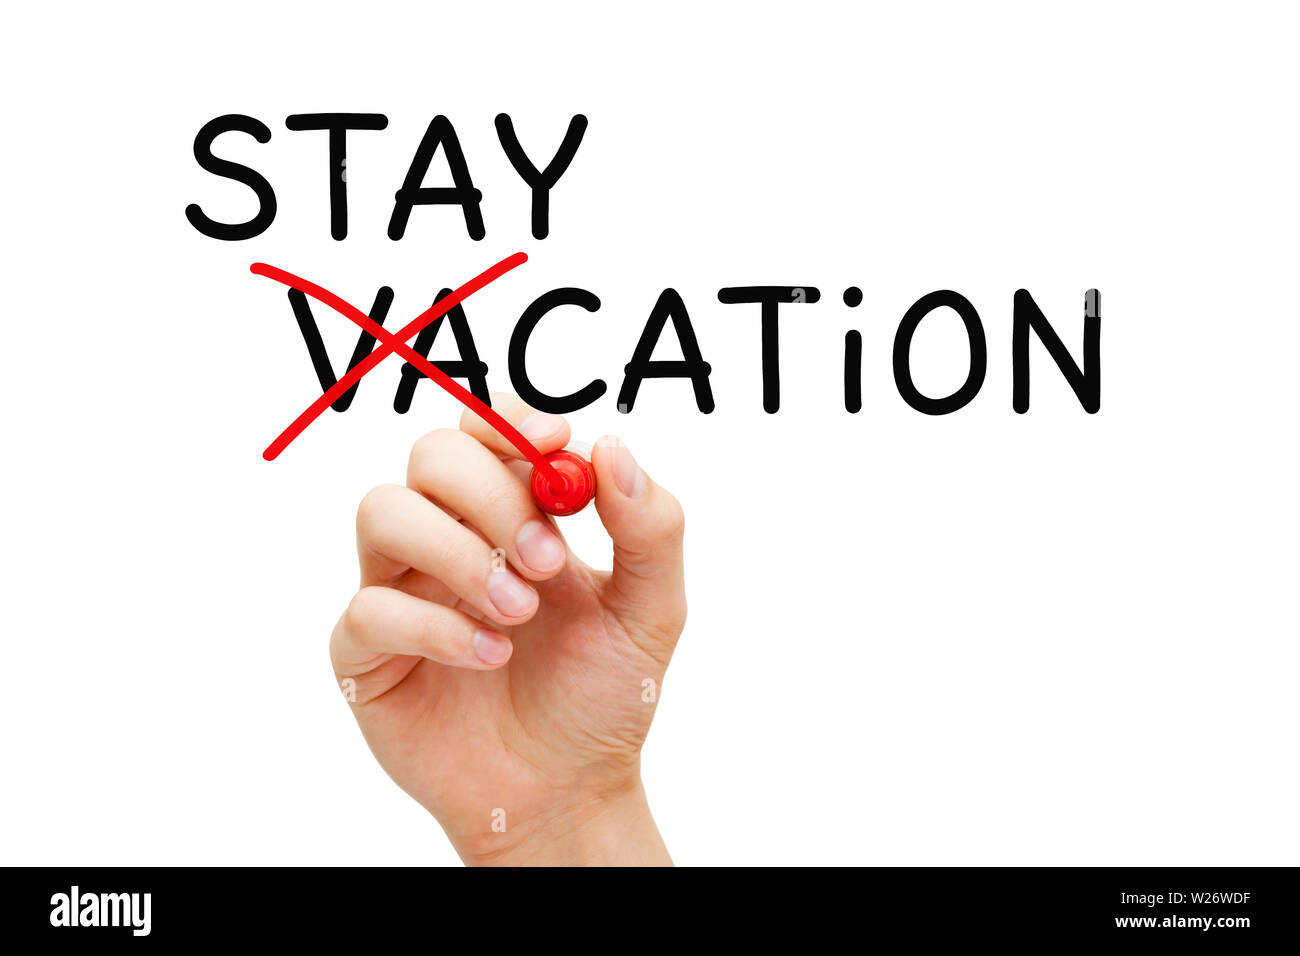 Hand turning the word Vacation into Staycation. Concept about spending a holiday at home or nearby rather than travelling to another place. Stock Photo